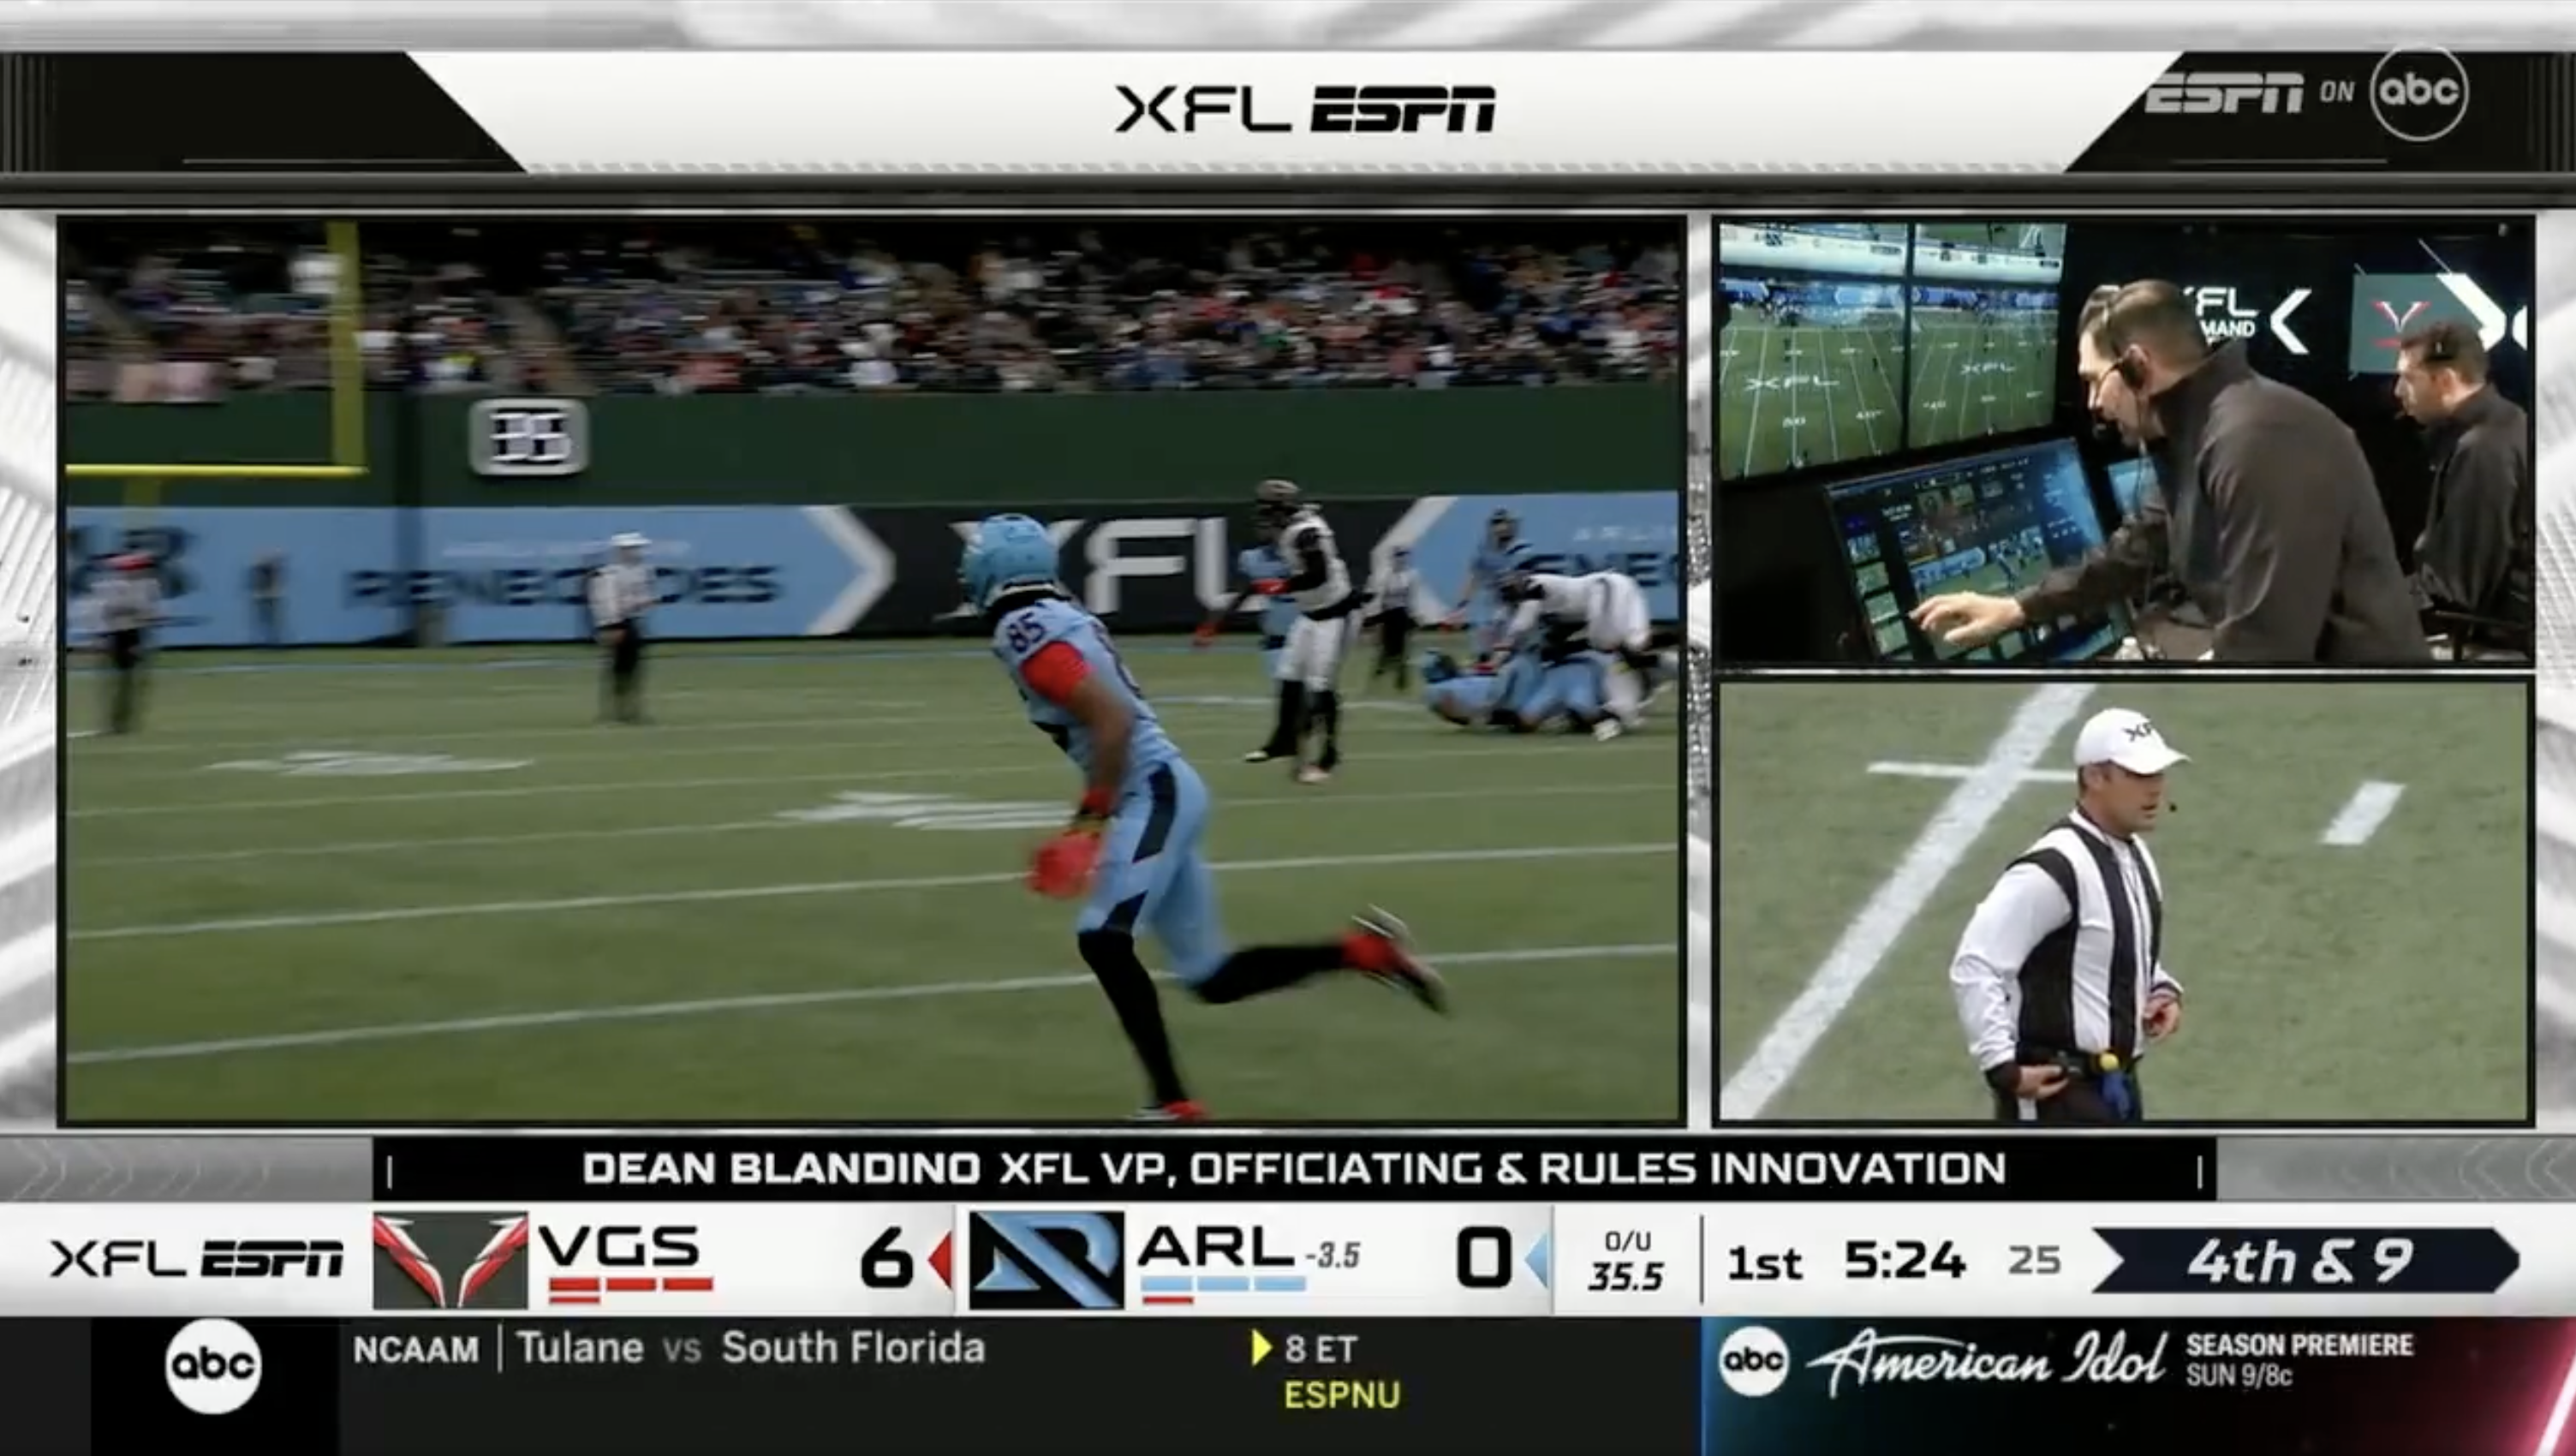 The XFL on ESPN broadcast shows off a new replay system with Dean Blandino in the Command Center.